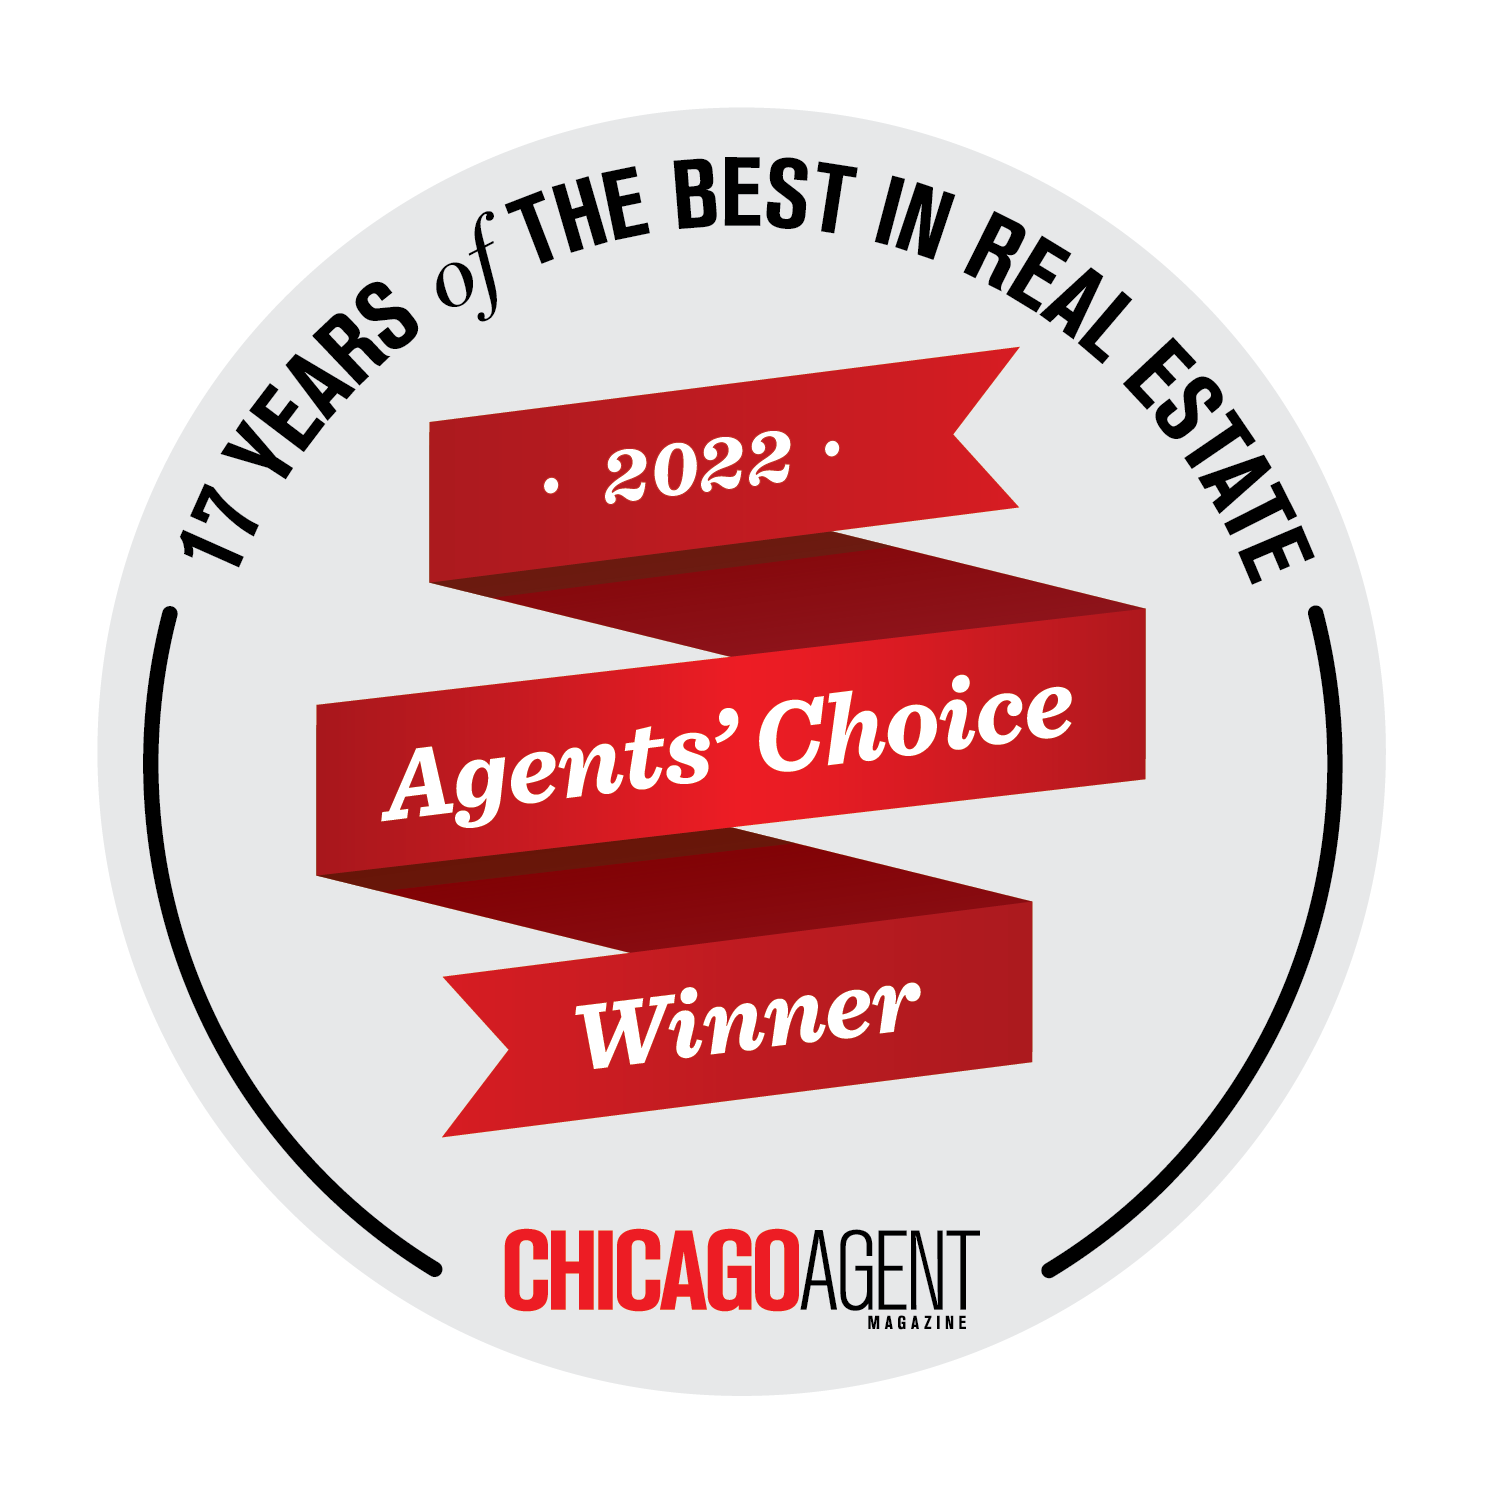 A text banner describing the best real estate agent in Chicago for 2022.